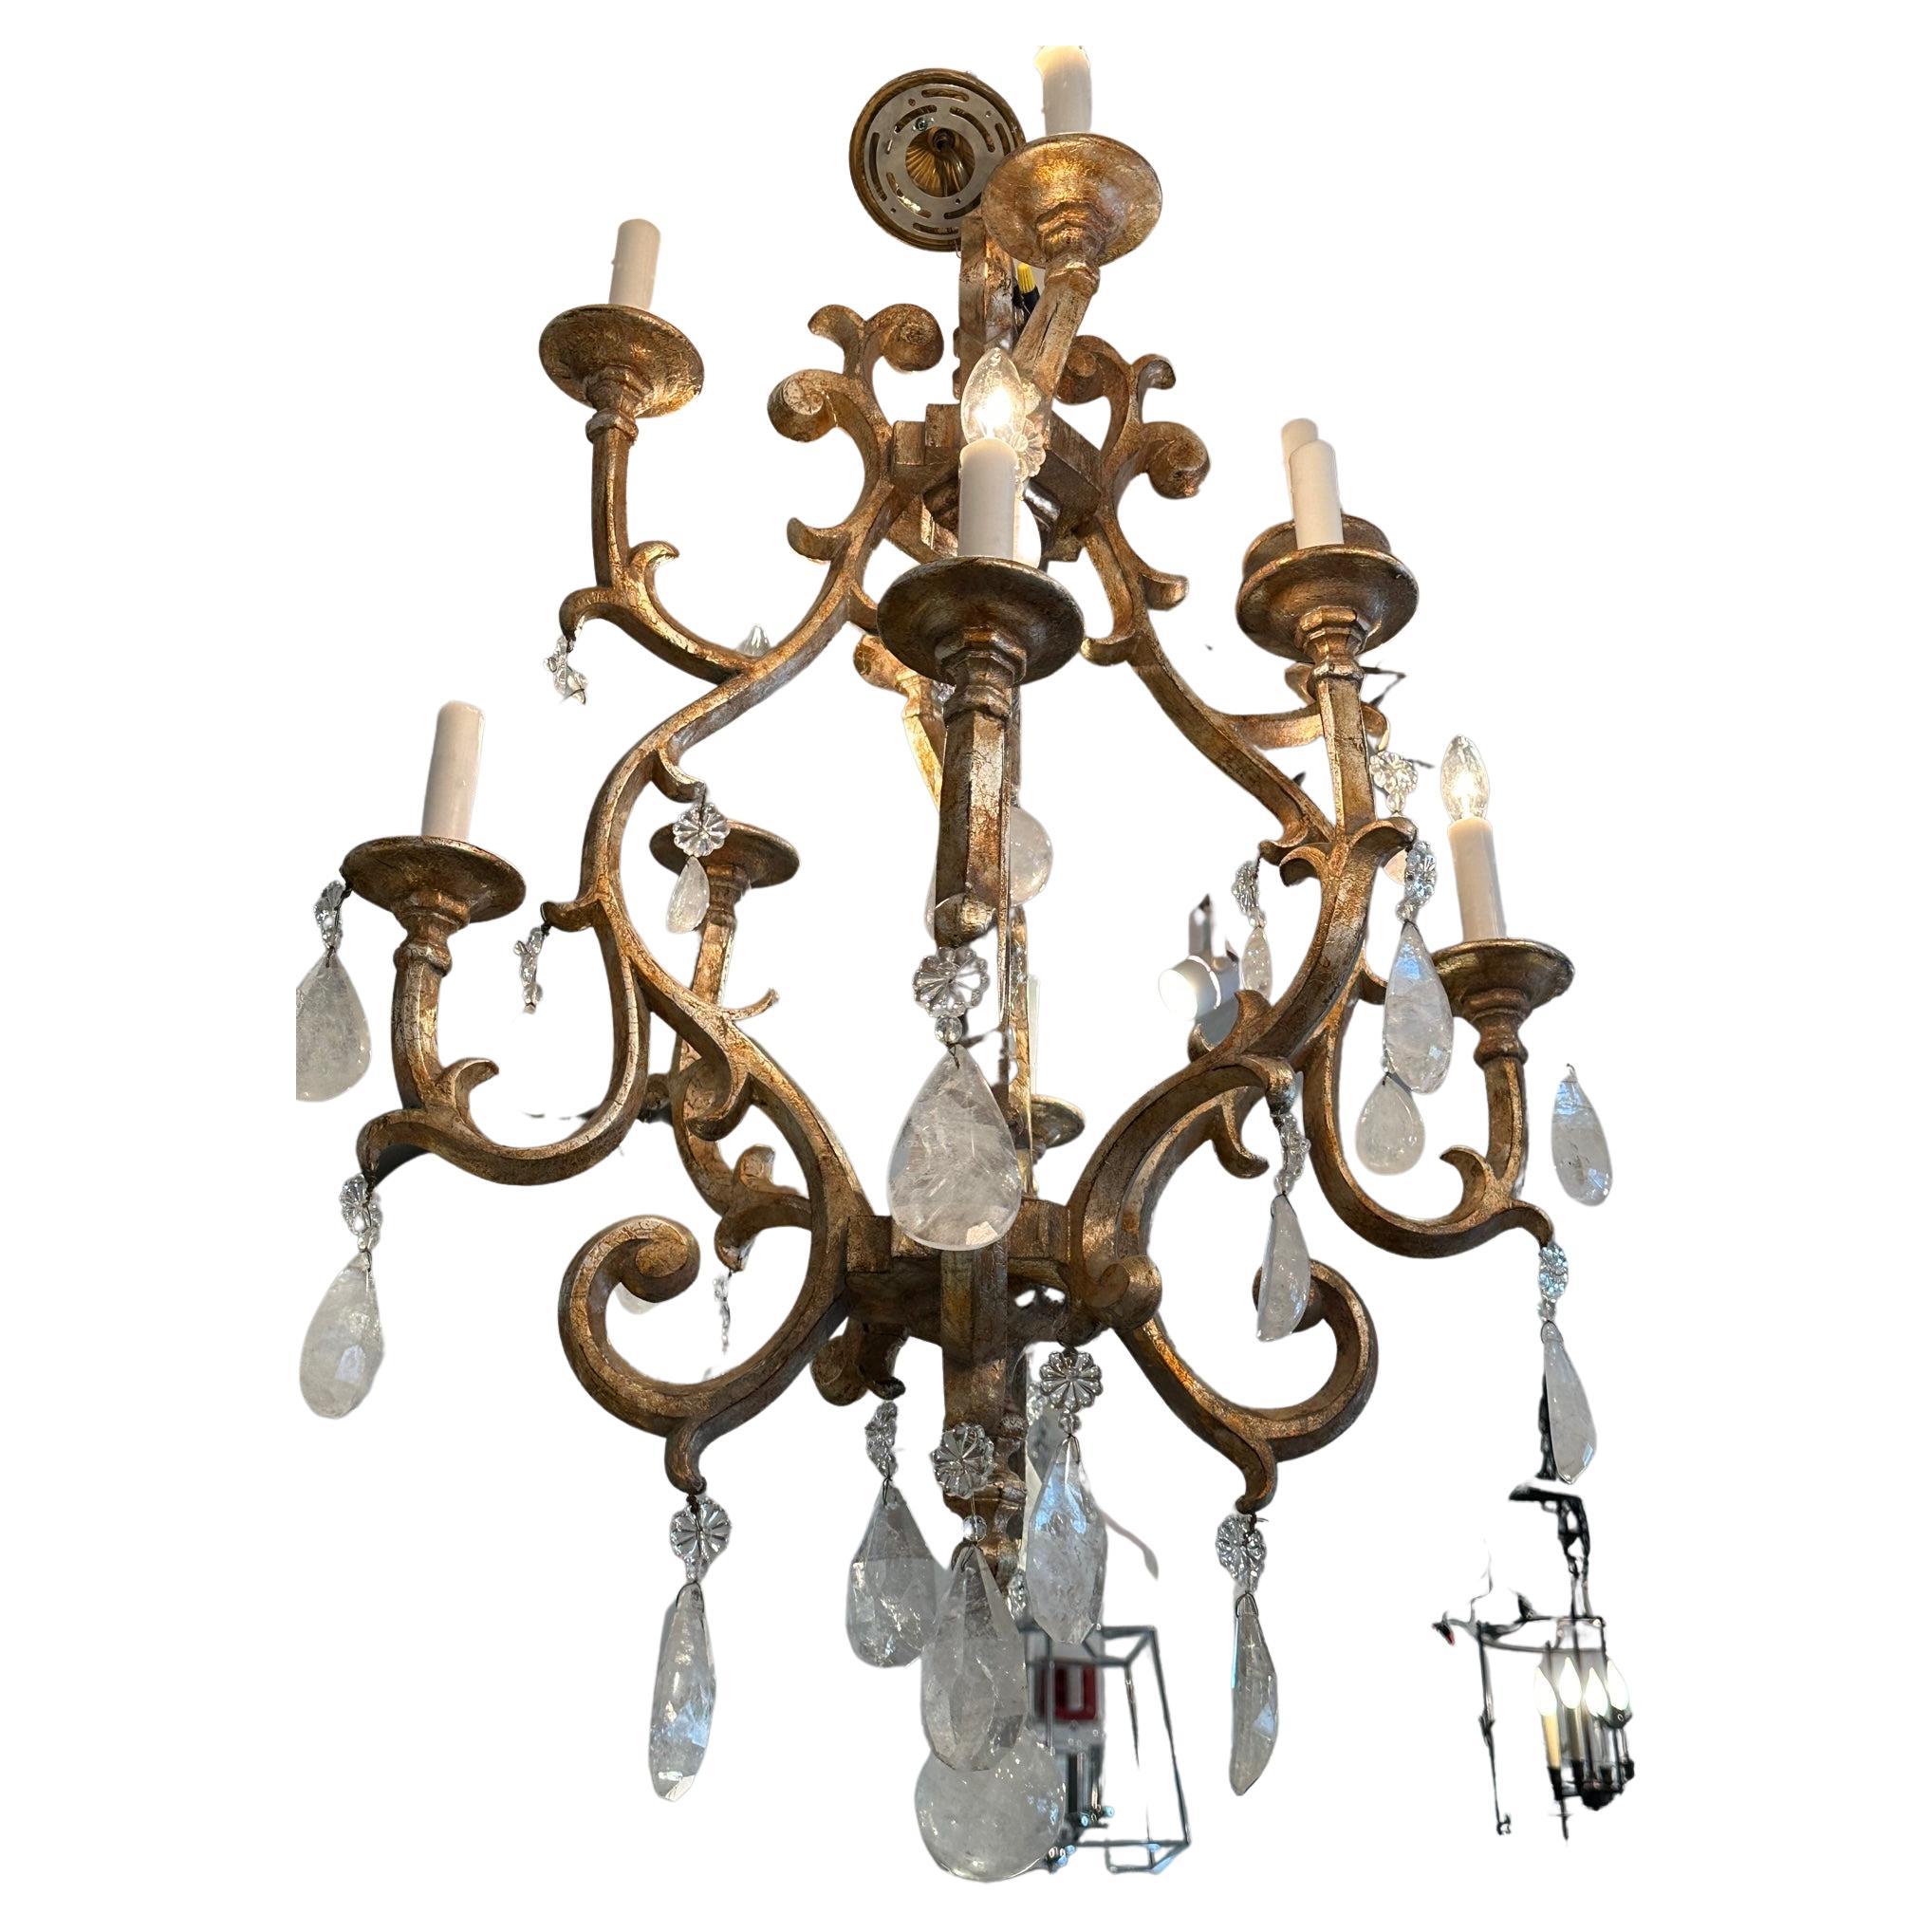 Fabulously stylish contemporary designer giltwood multi arm chandelier with big glamorous rock crystals.
Note: Pair of matching sconces are available.
